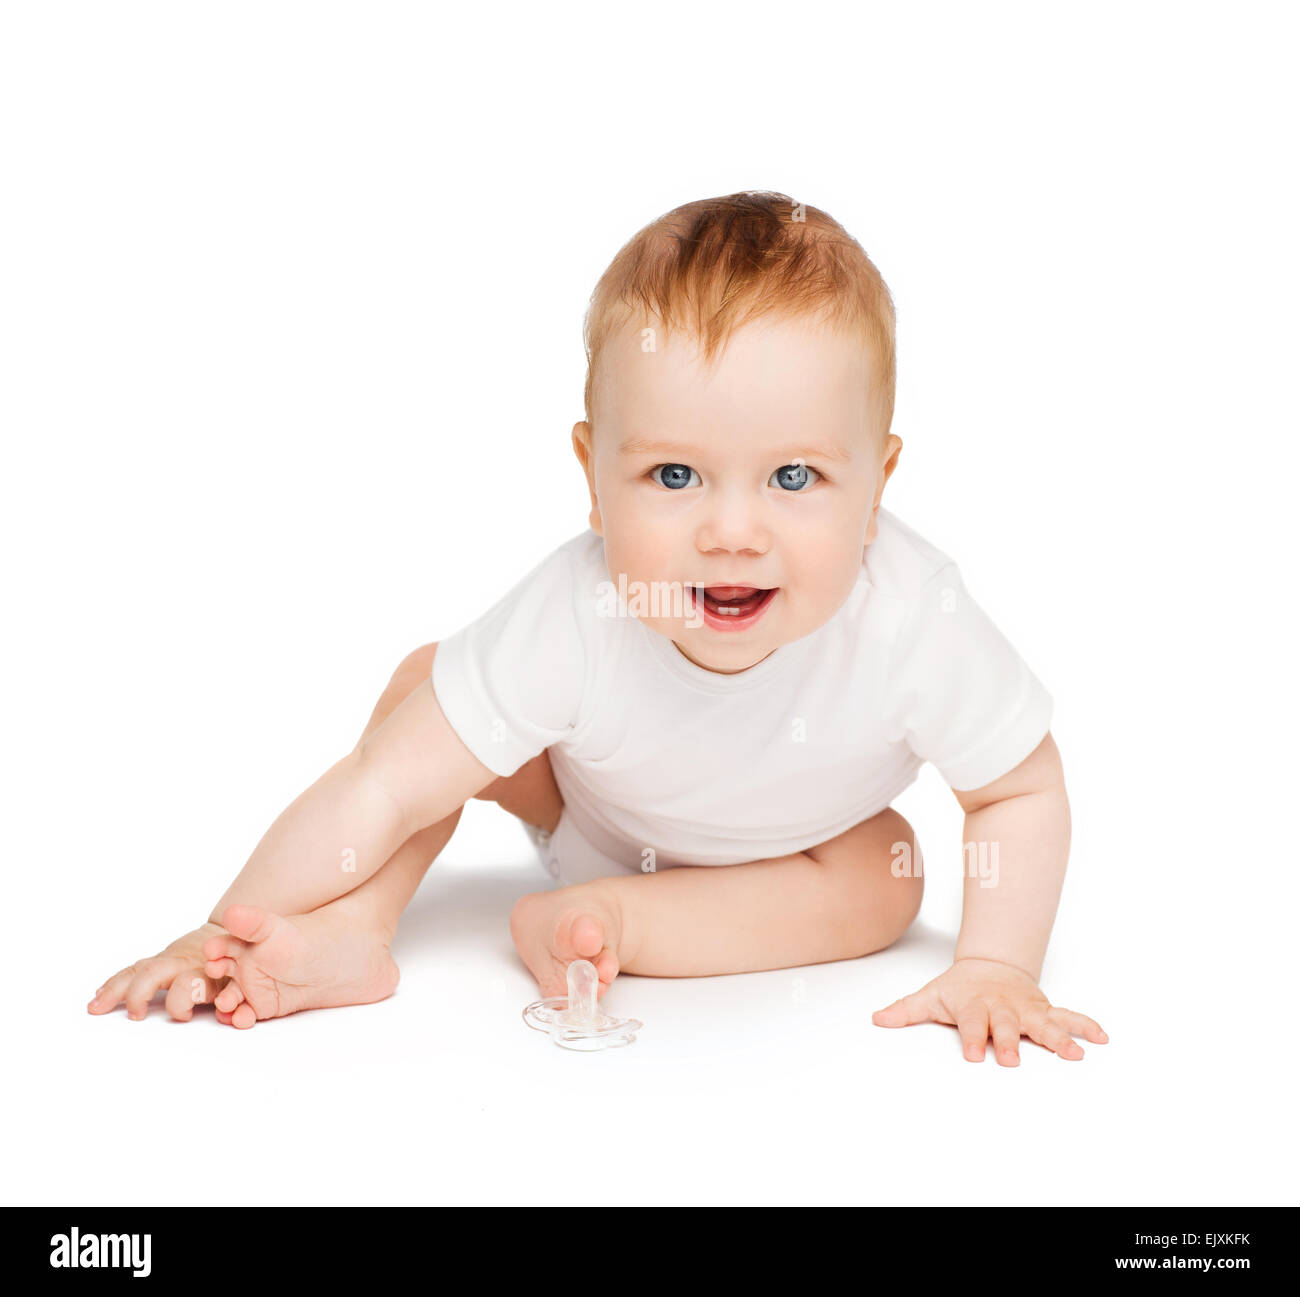 Smiling baby sitting on the floor Banque D'Images